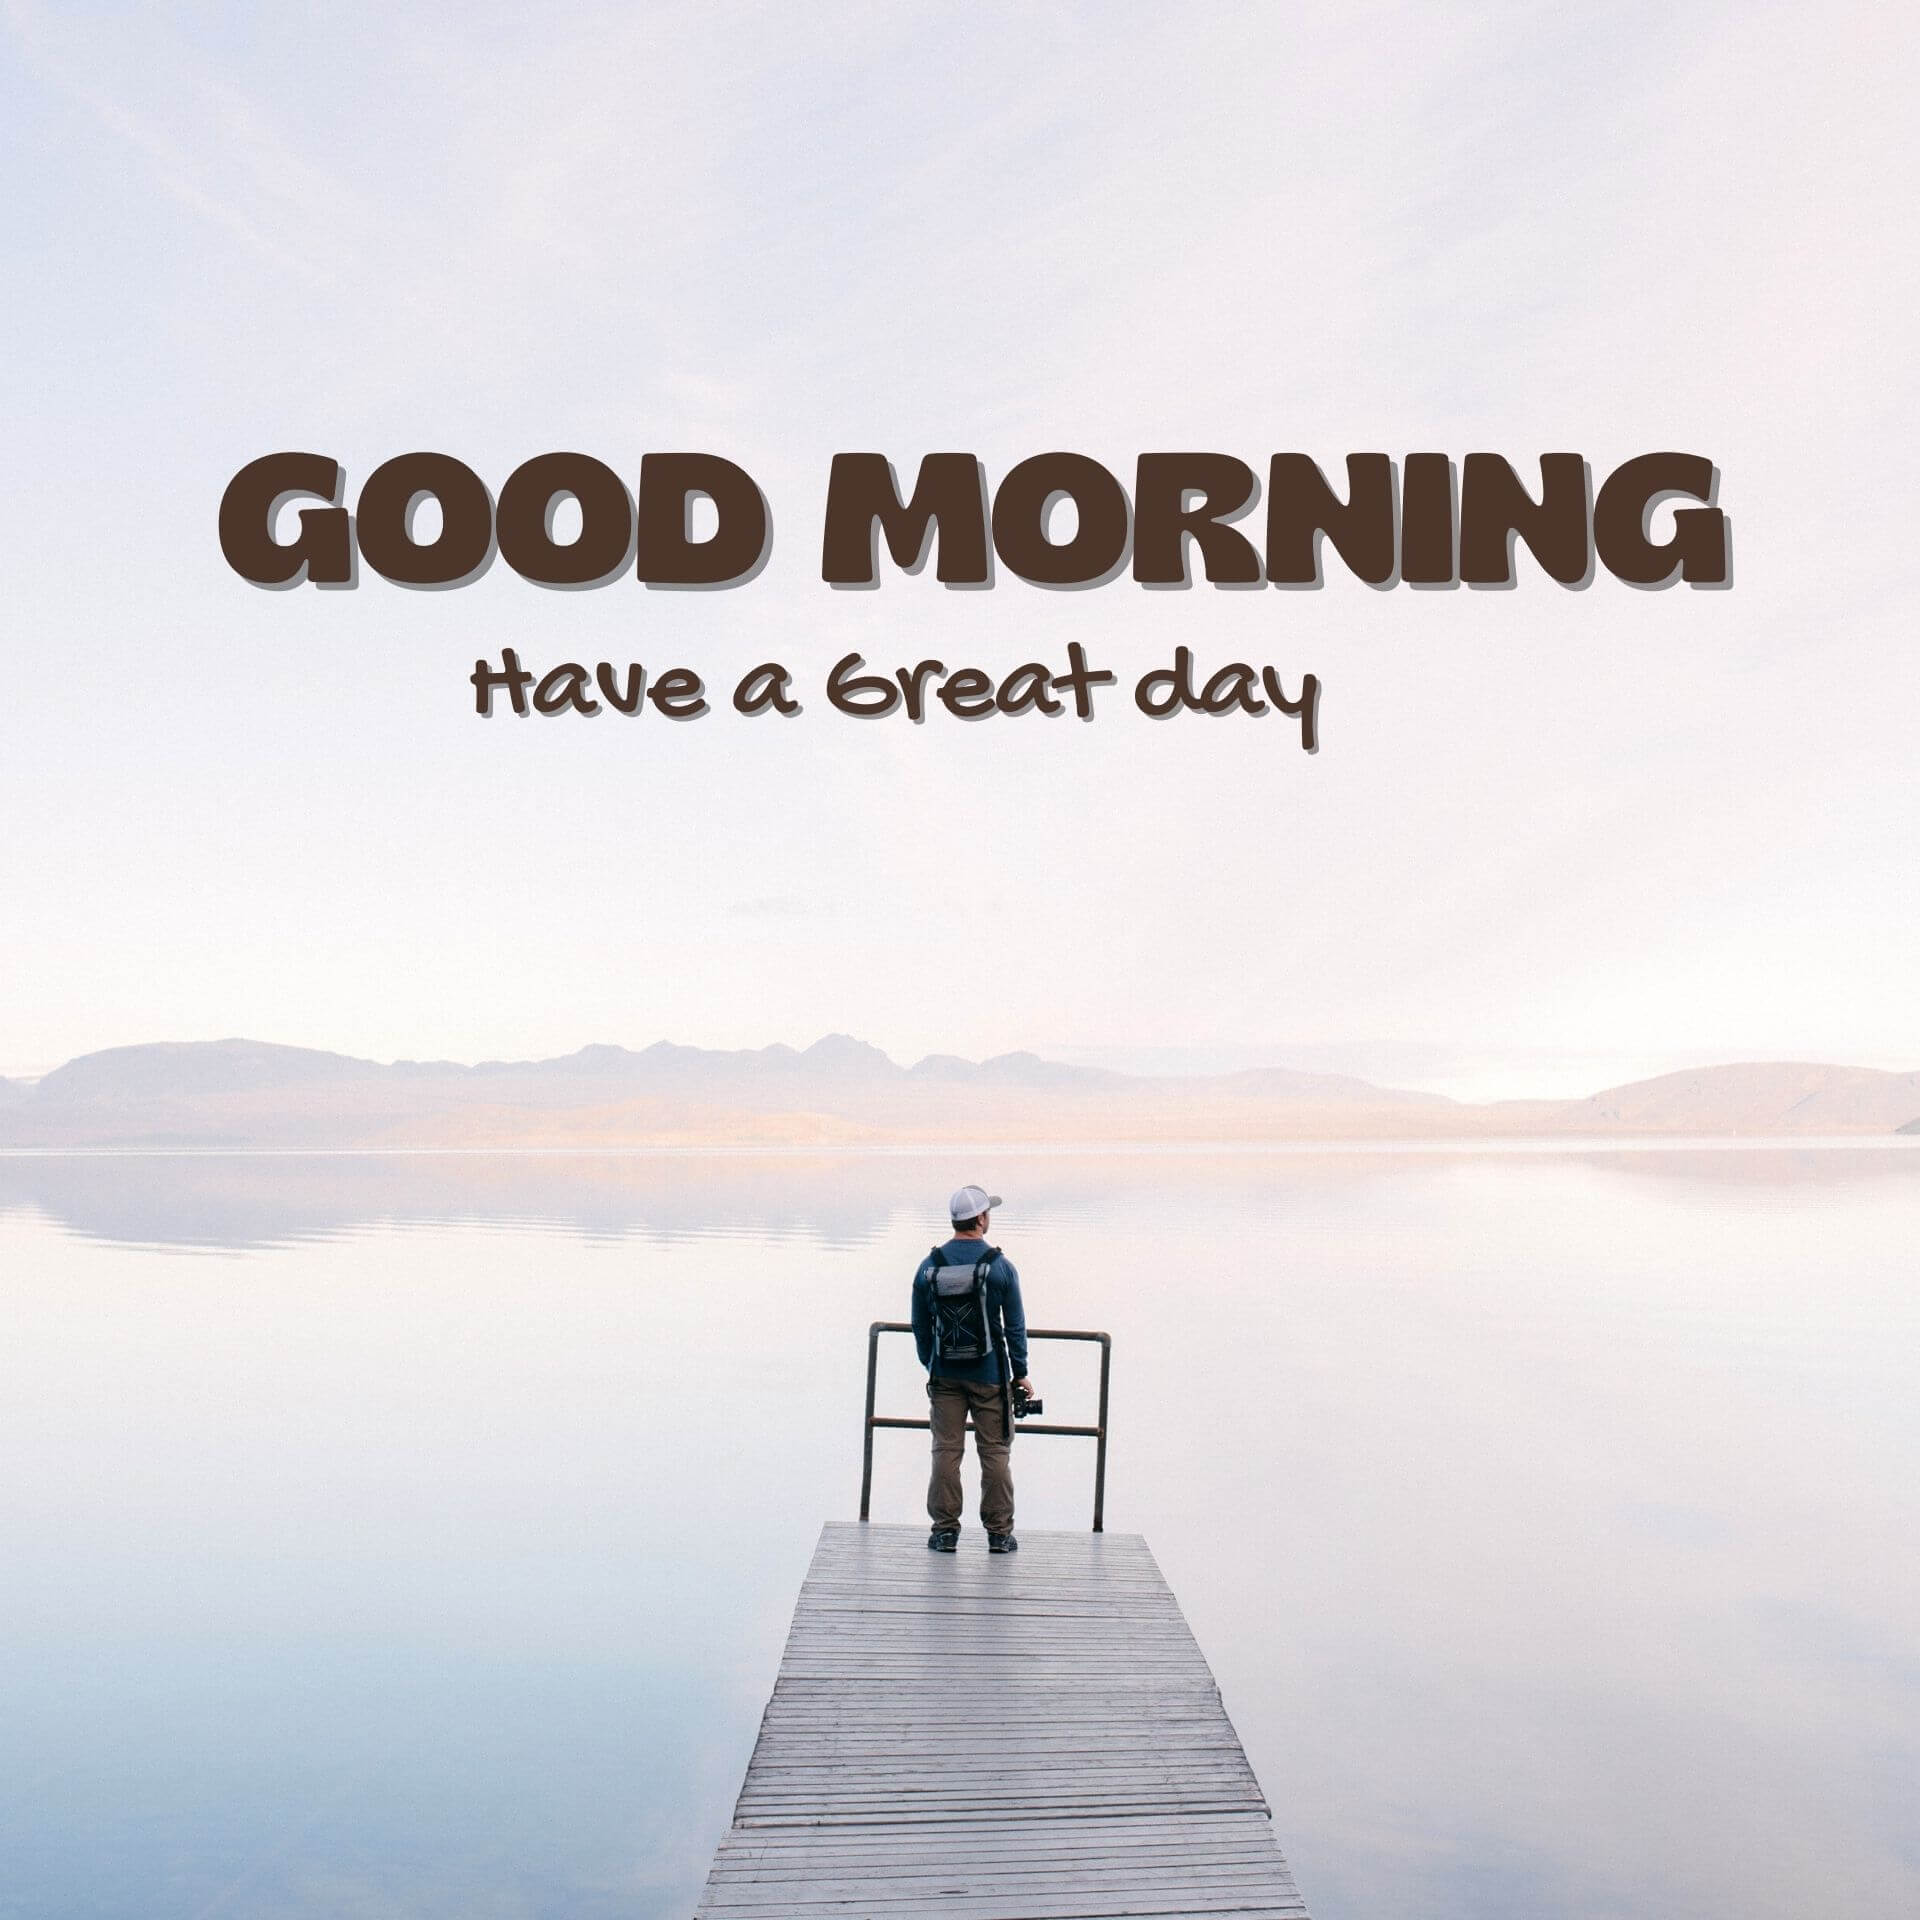 Good morning have a nice day Wallpaper HD 2023